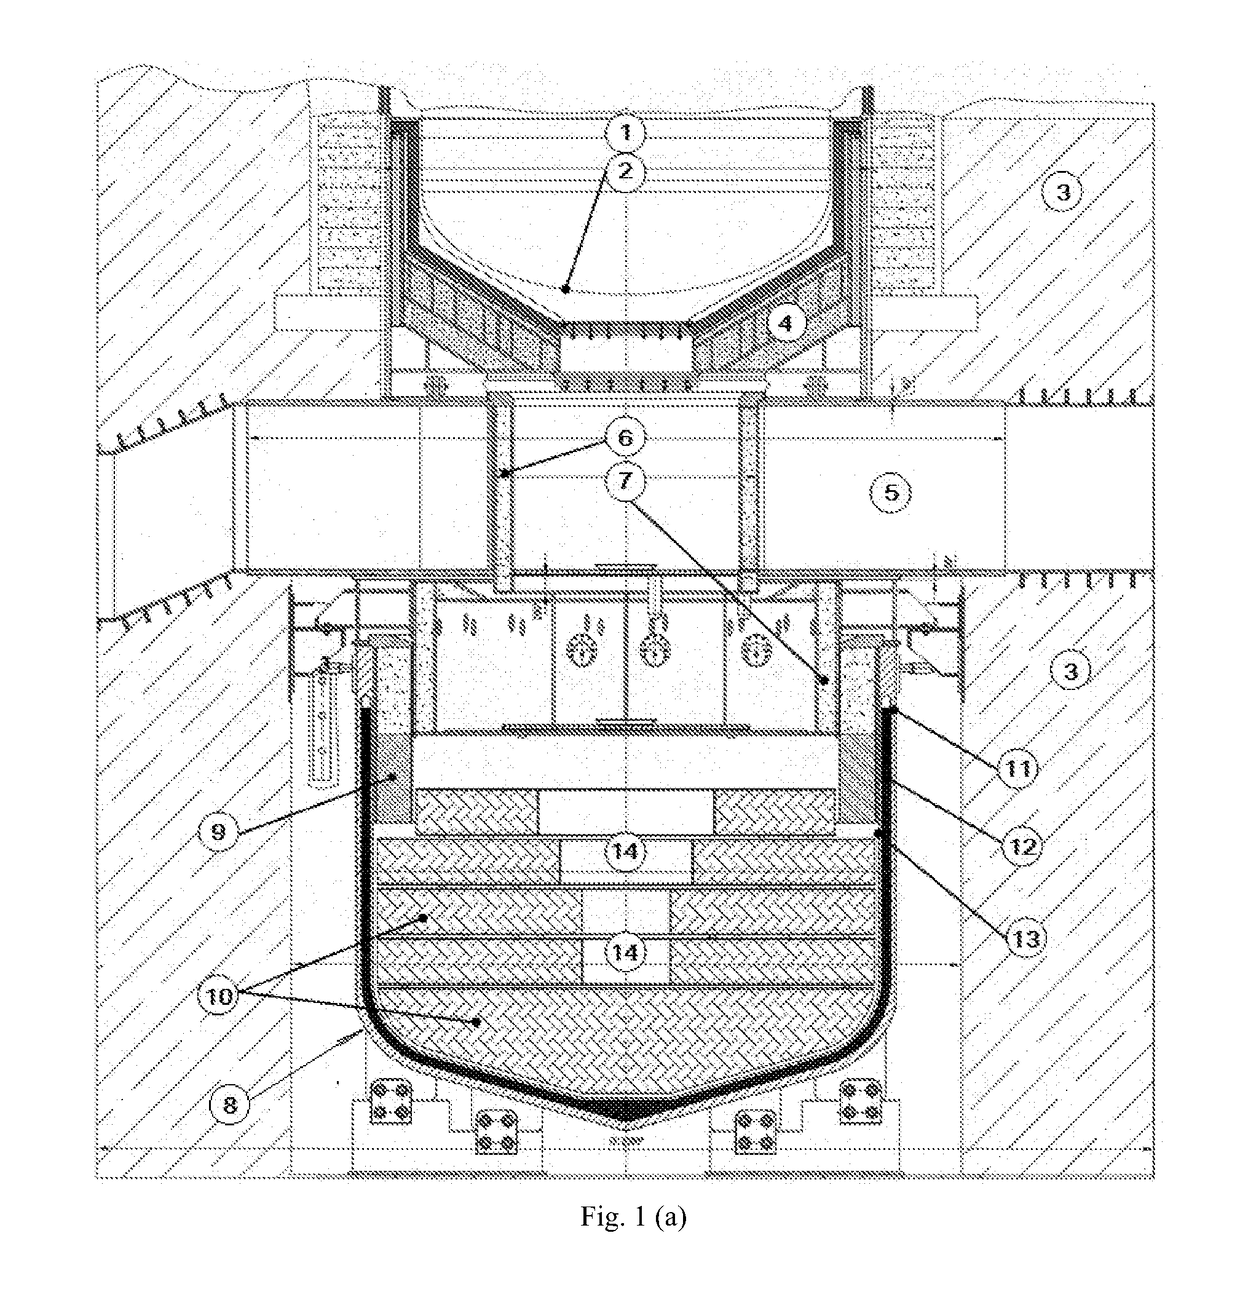 Water-Cooled Water-Moderated Nuclear Reactor Core Melt Cooling and Confinement System